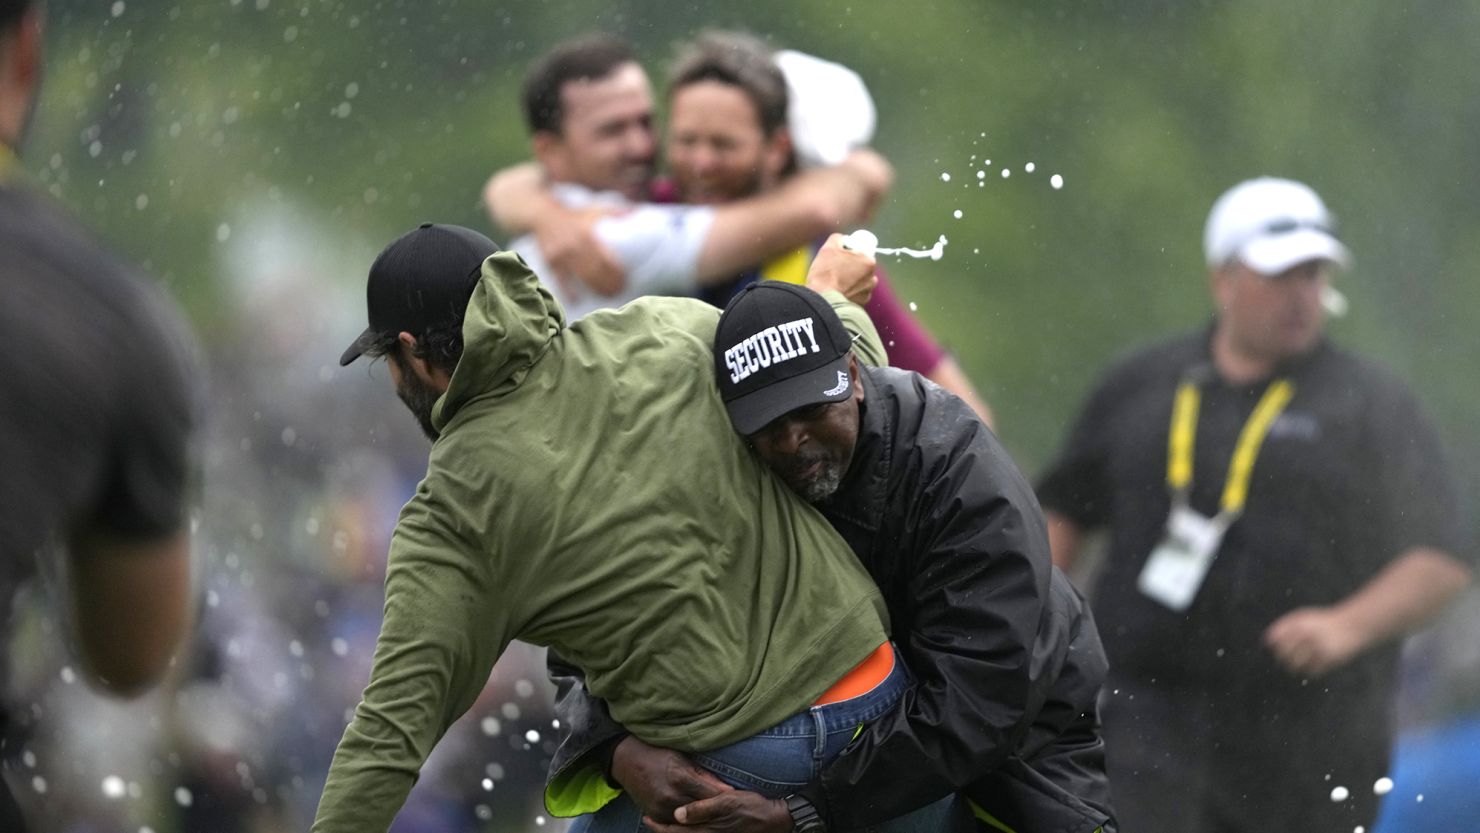 Canadian golfer Adam Hadwin, left, is tackled by a security guard when he tries to celebrate with compatriot Nick Taylor, background left, after Taylor won the Canadian Open in Toronto on Sunday.